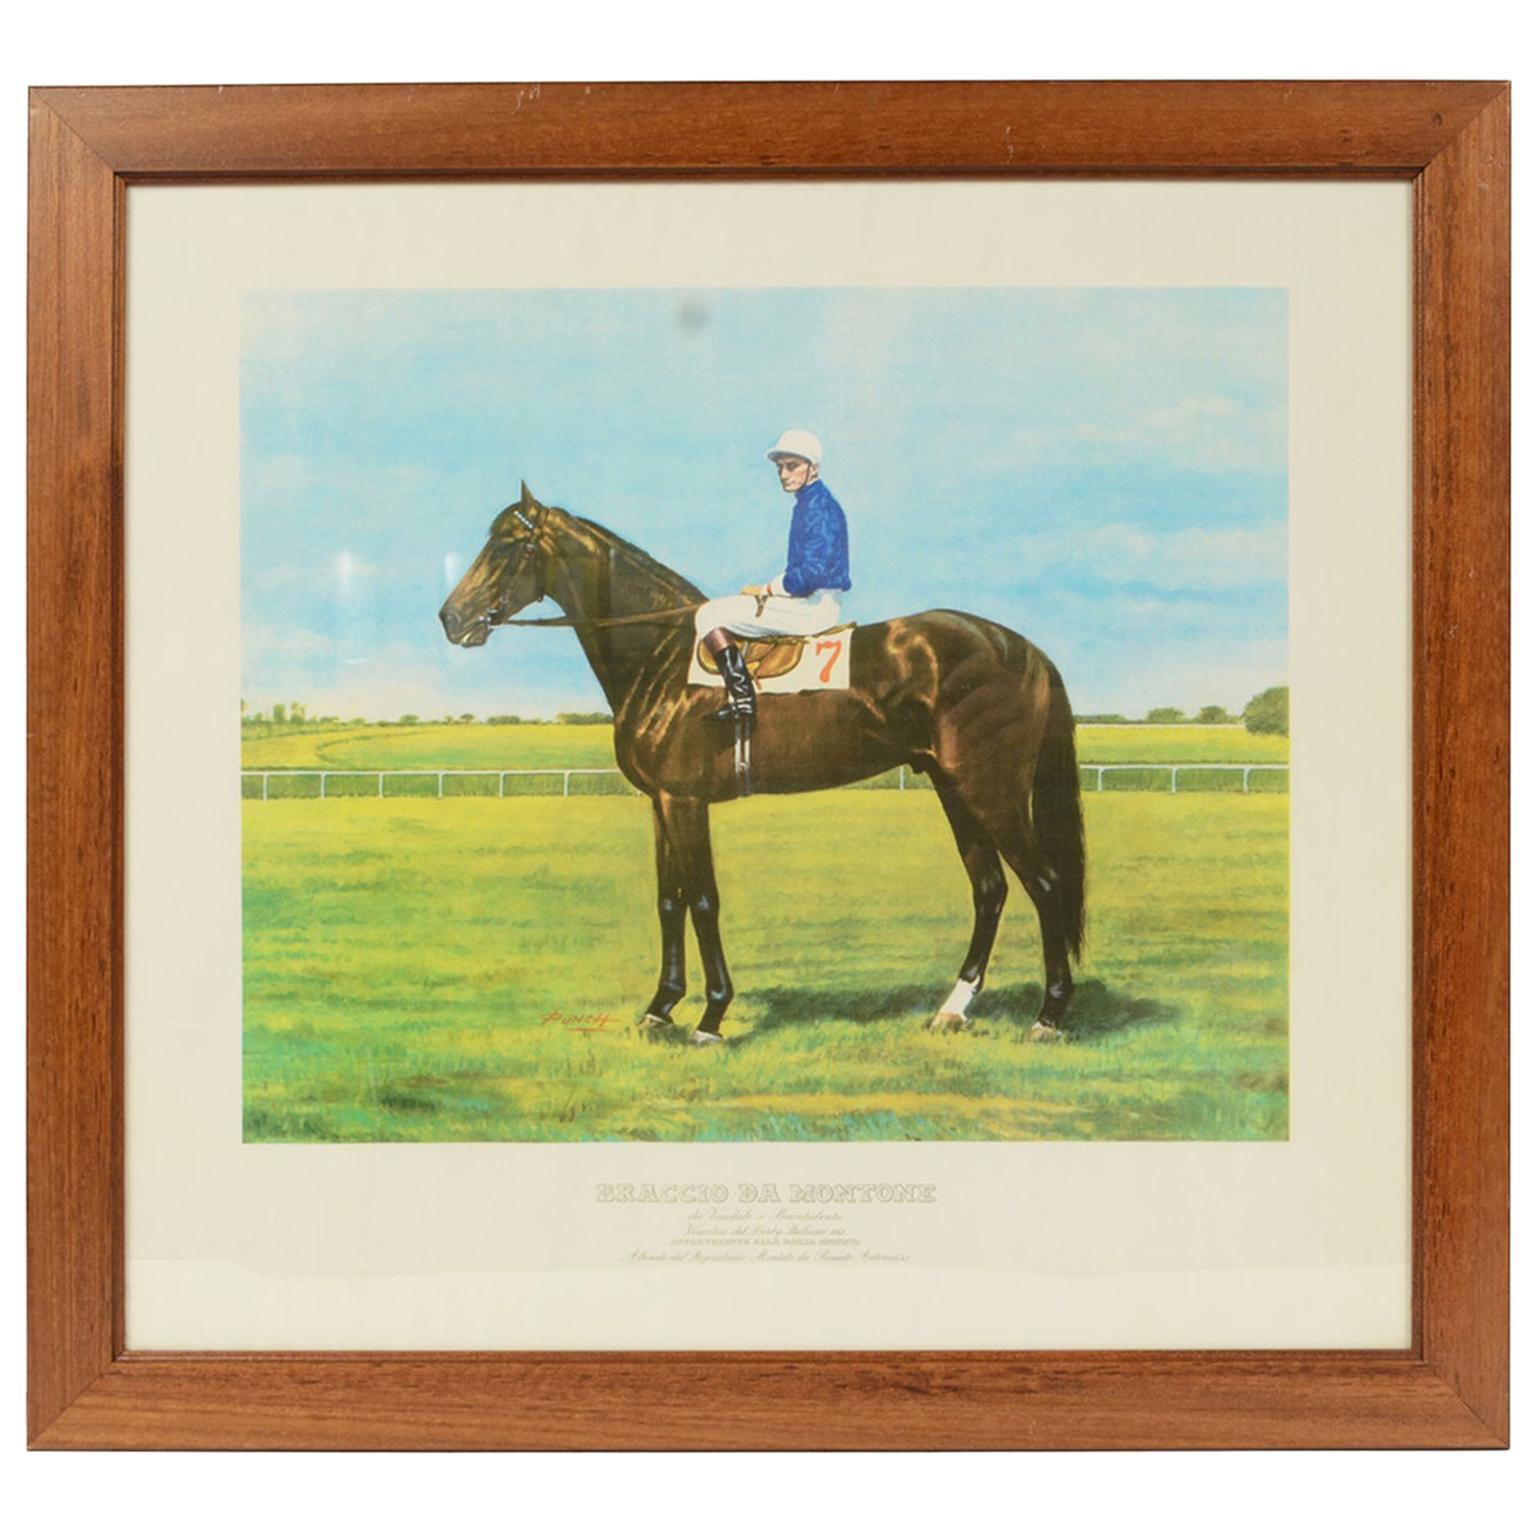 Lithograph Depicting the Horse Winner of the Italian Derby in 1963